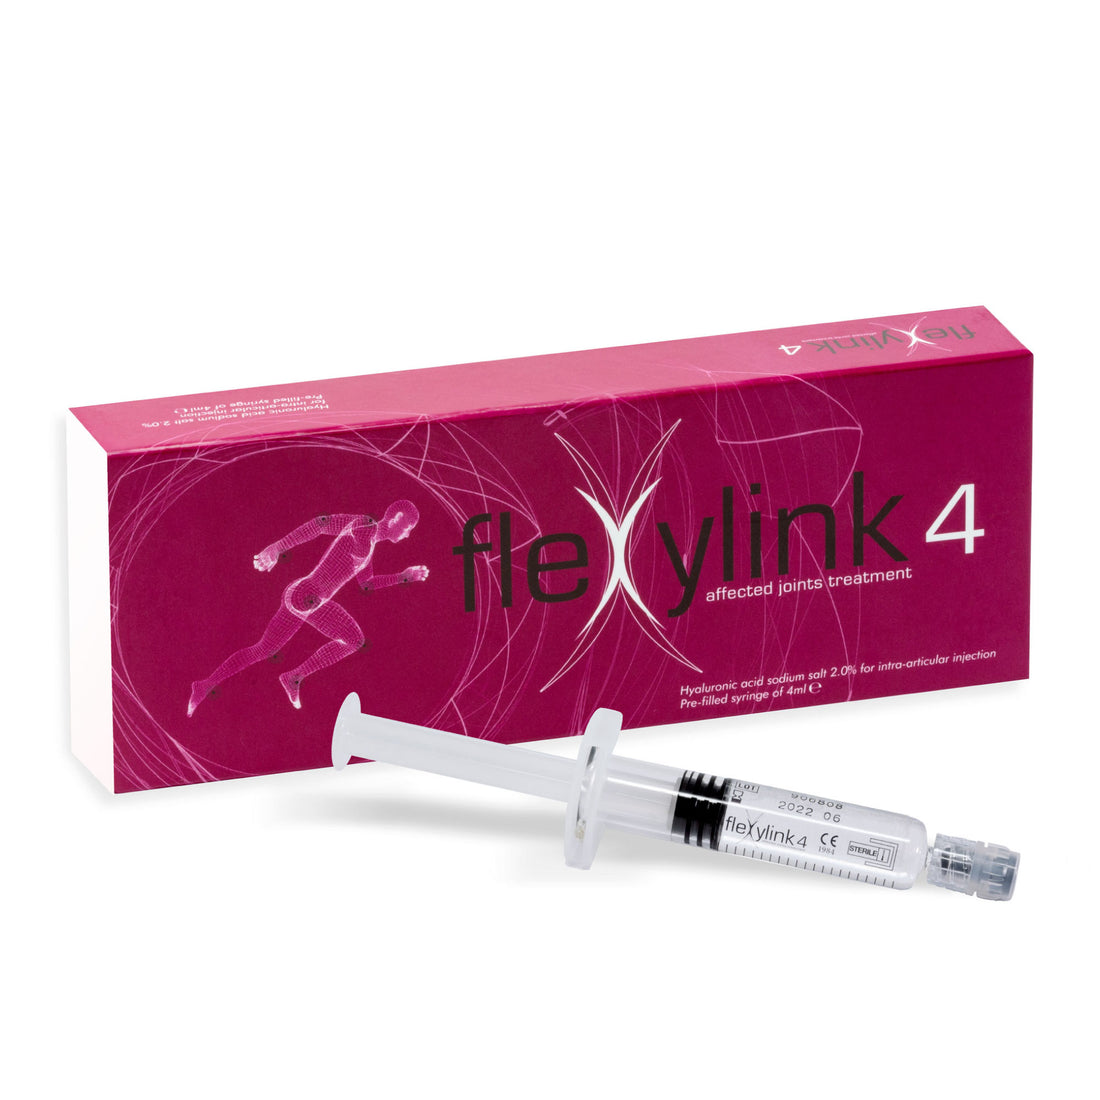 FLEXYLINK 4 - Linear Hyaluronic Acid with a High Viscosity Degree for Joints Affected by OA